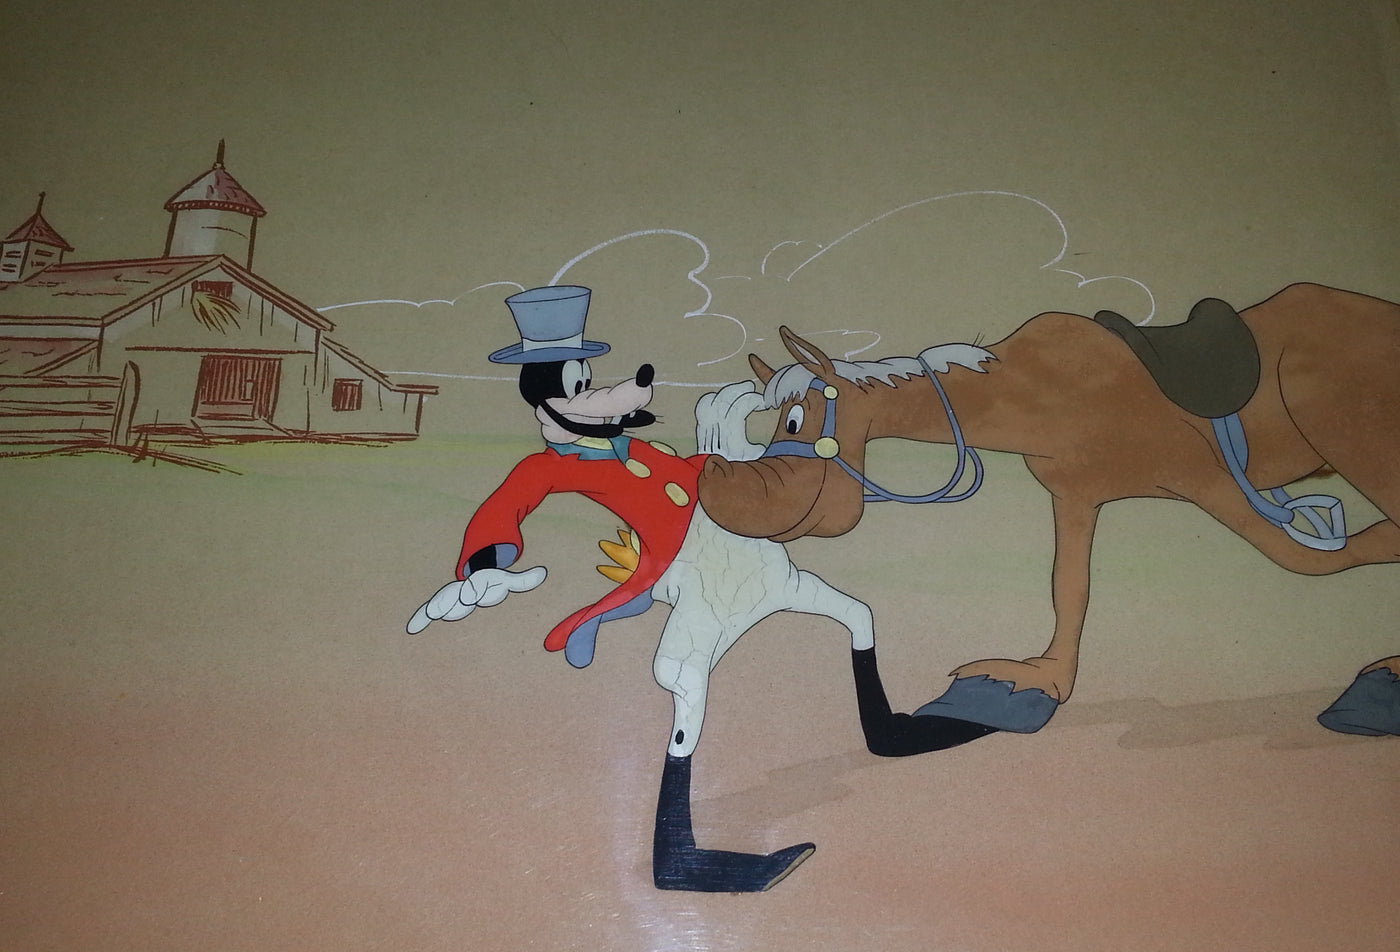 Original Walt Disney Production Cel Featuring Goofy from How to Ride a Horse